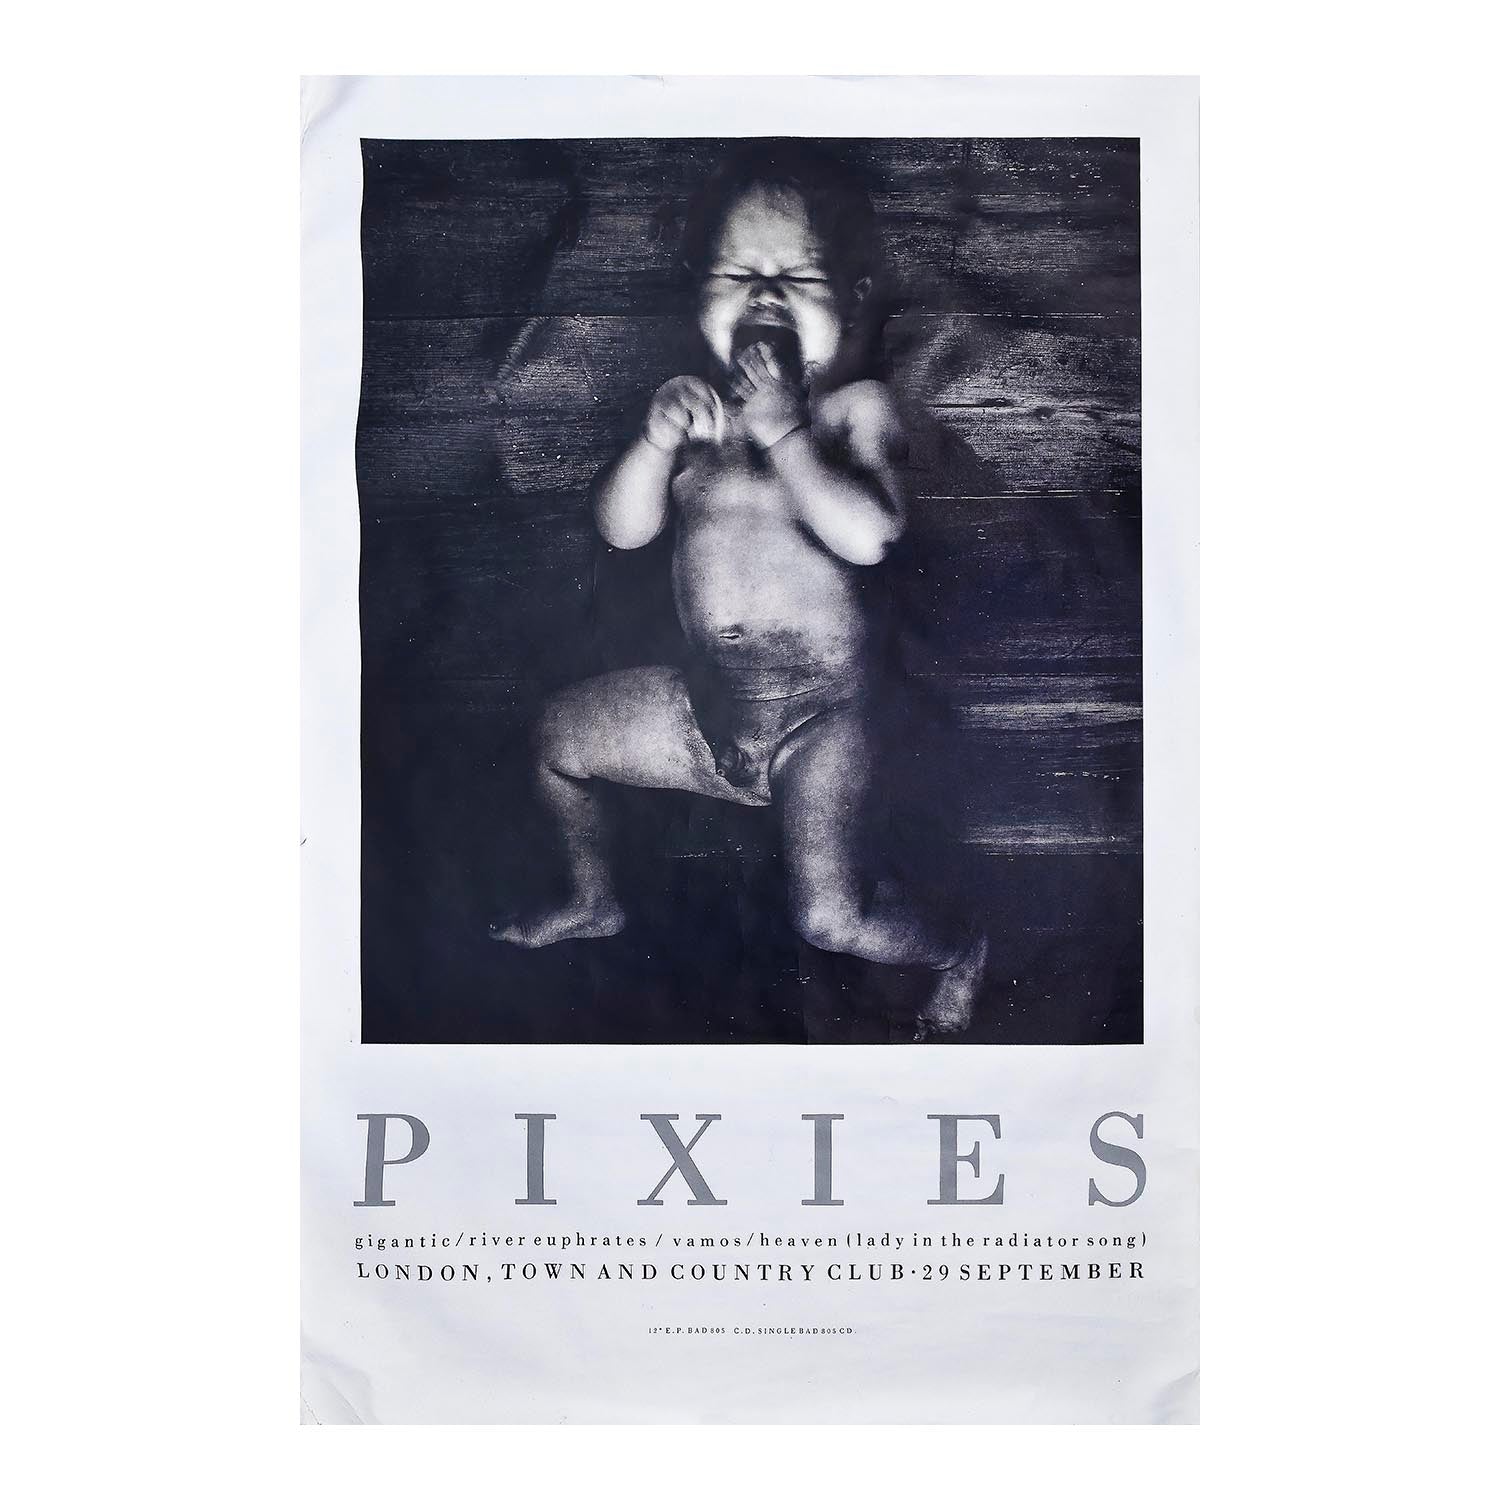 original, promotional poster for the American alternative rock band Pixies, which advertises the band’s first single, Gigantic, and a live performance at the Town and Country Club on the band’s first UK headlining tour, 29 September 1988